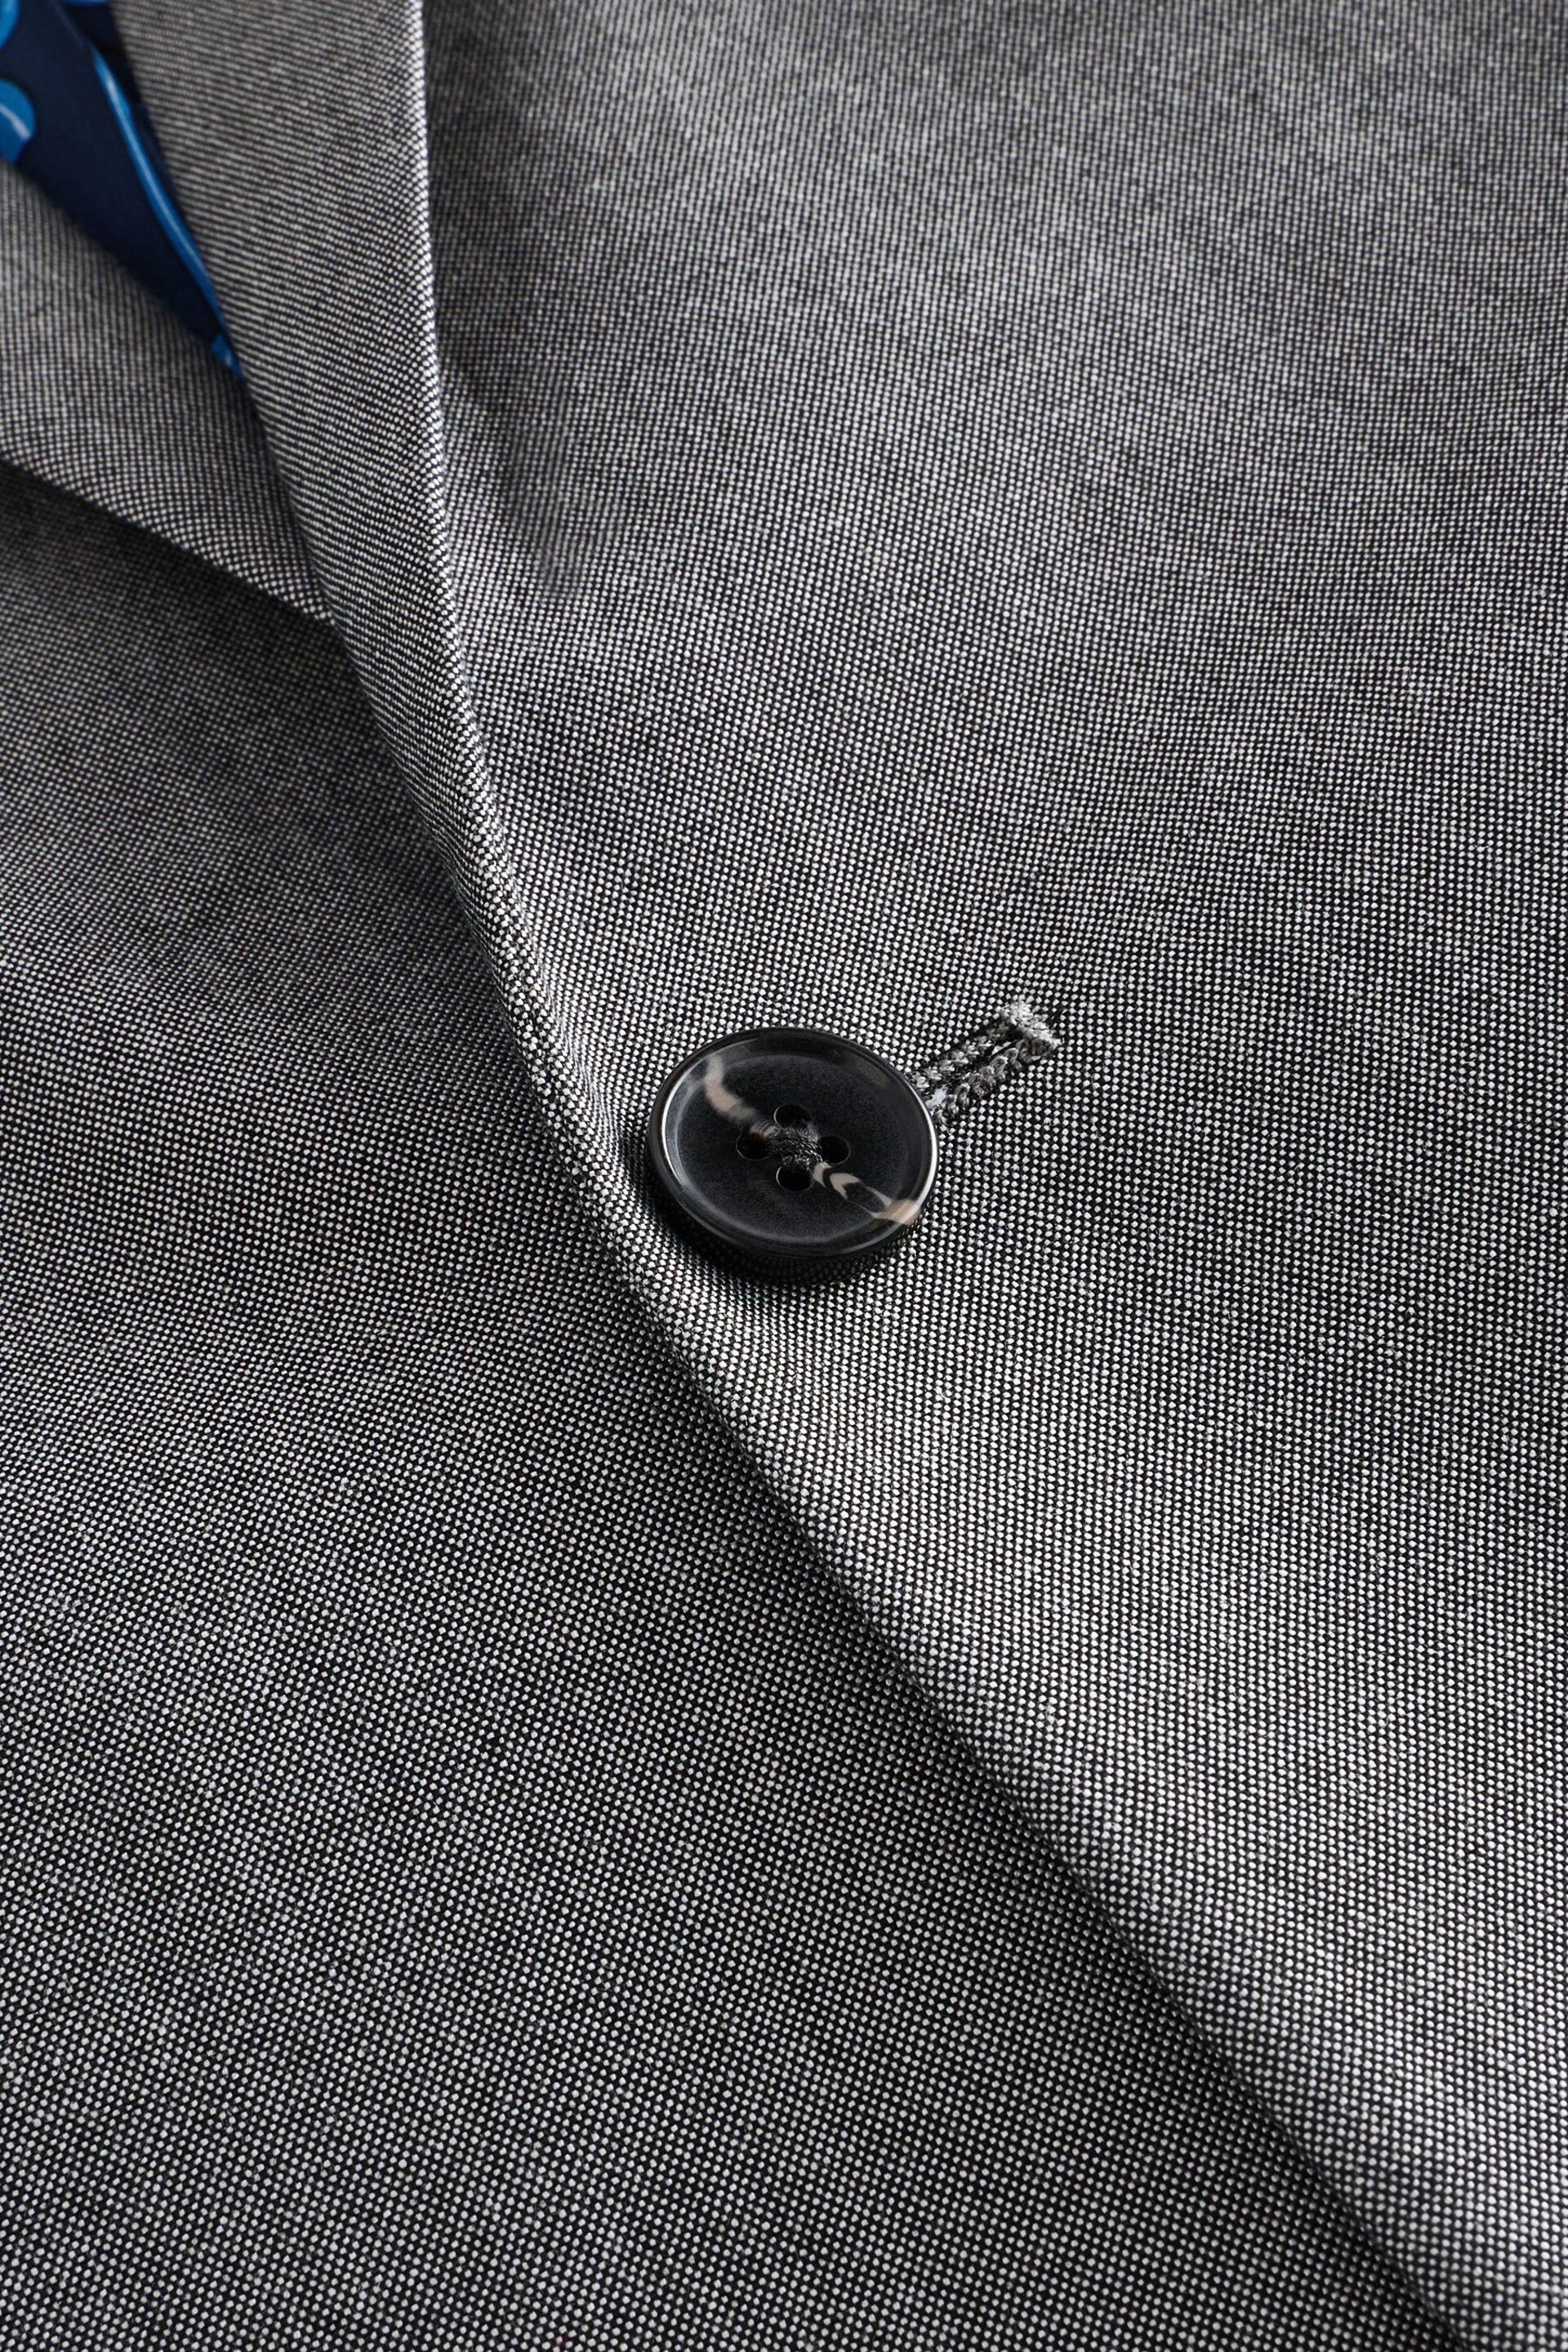 Light Grey Slim Two Button Suit Jacket - Image 5 of 7